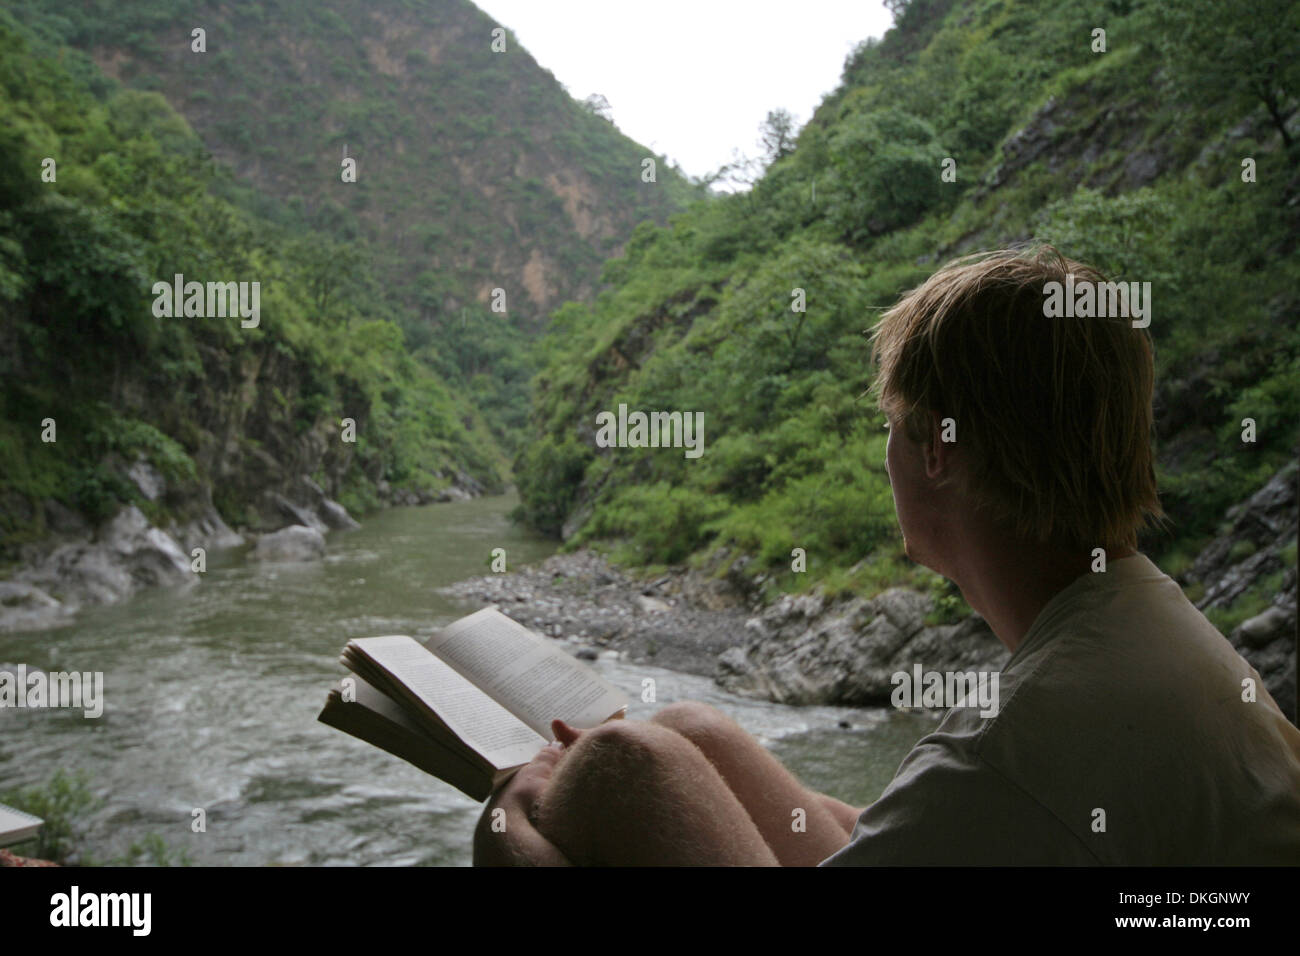 A young person reading a book by a slow flowing river, in the foothills of the Himalayas. Stock Photo